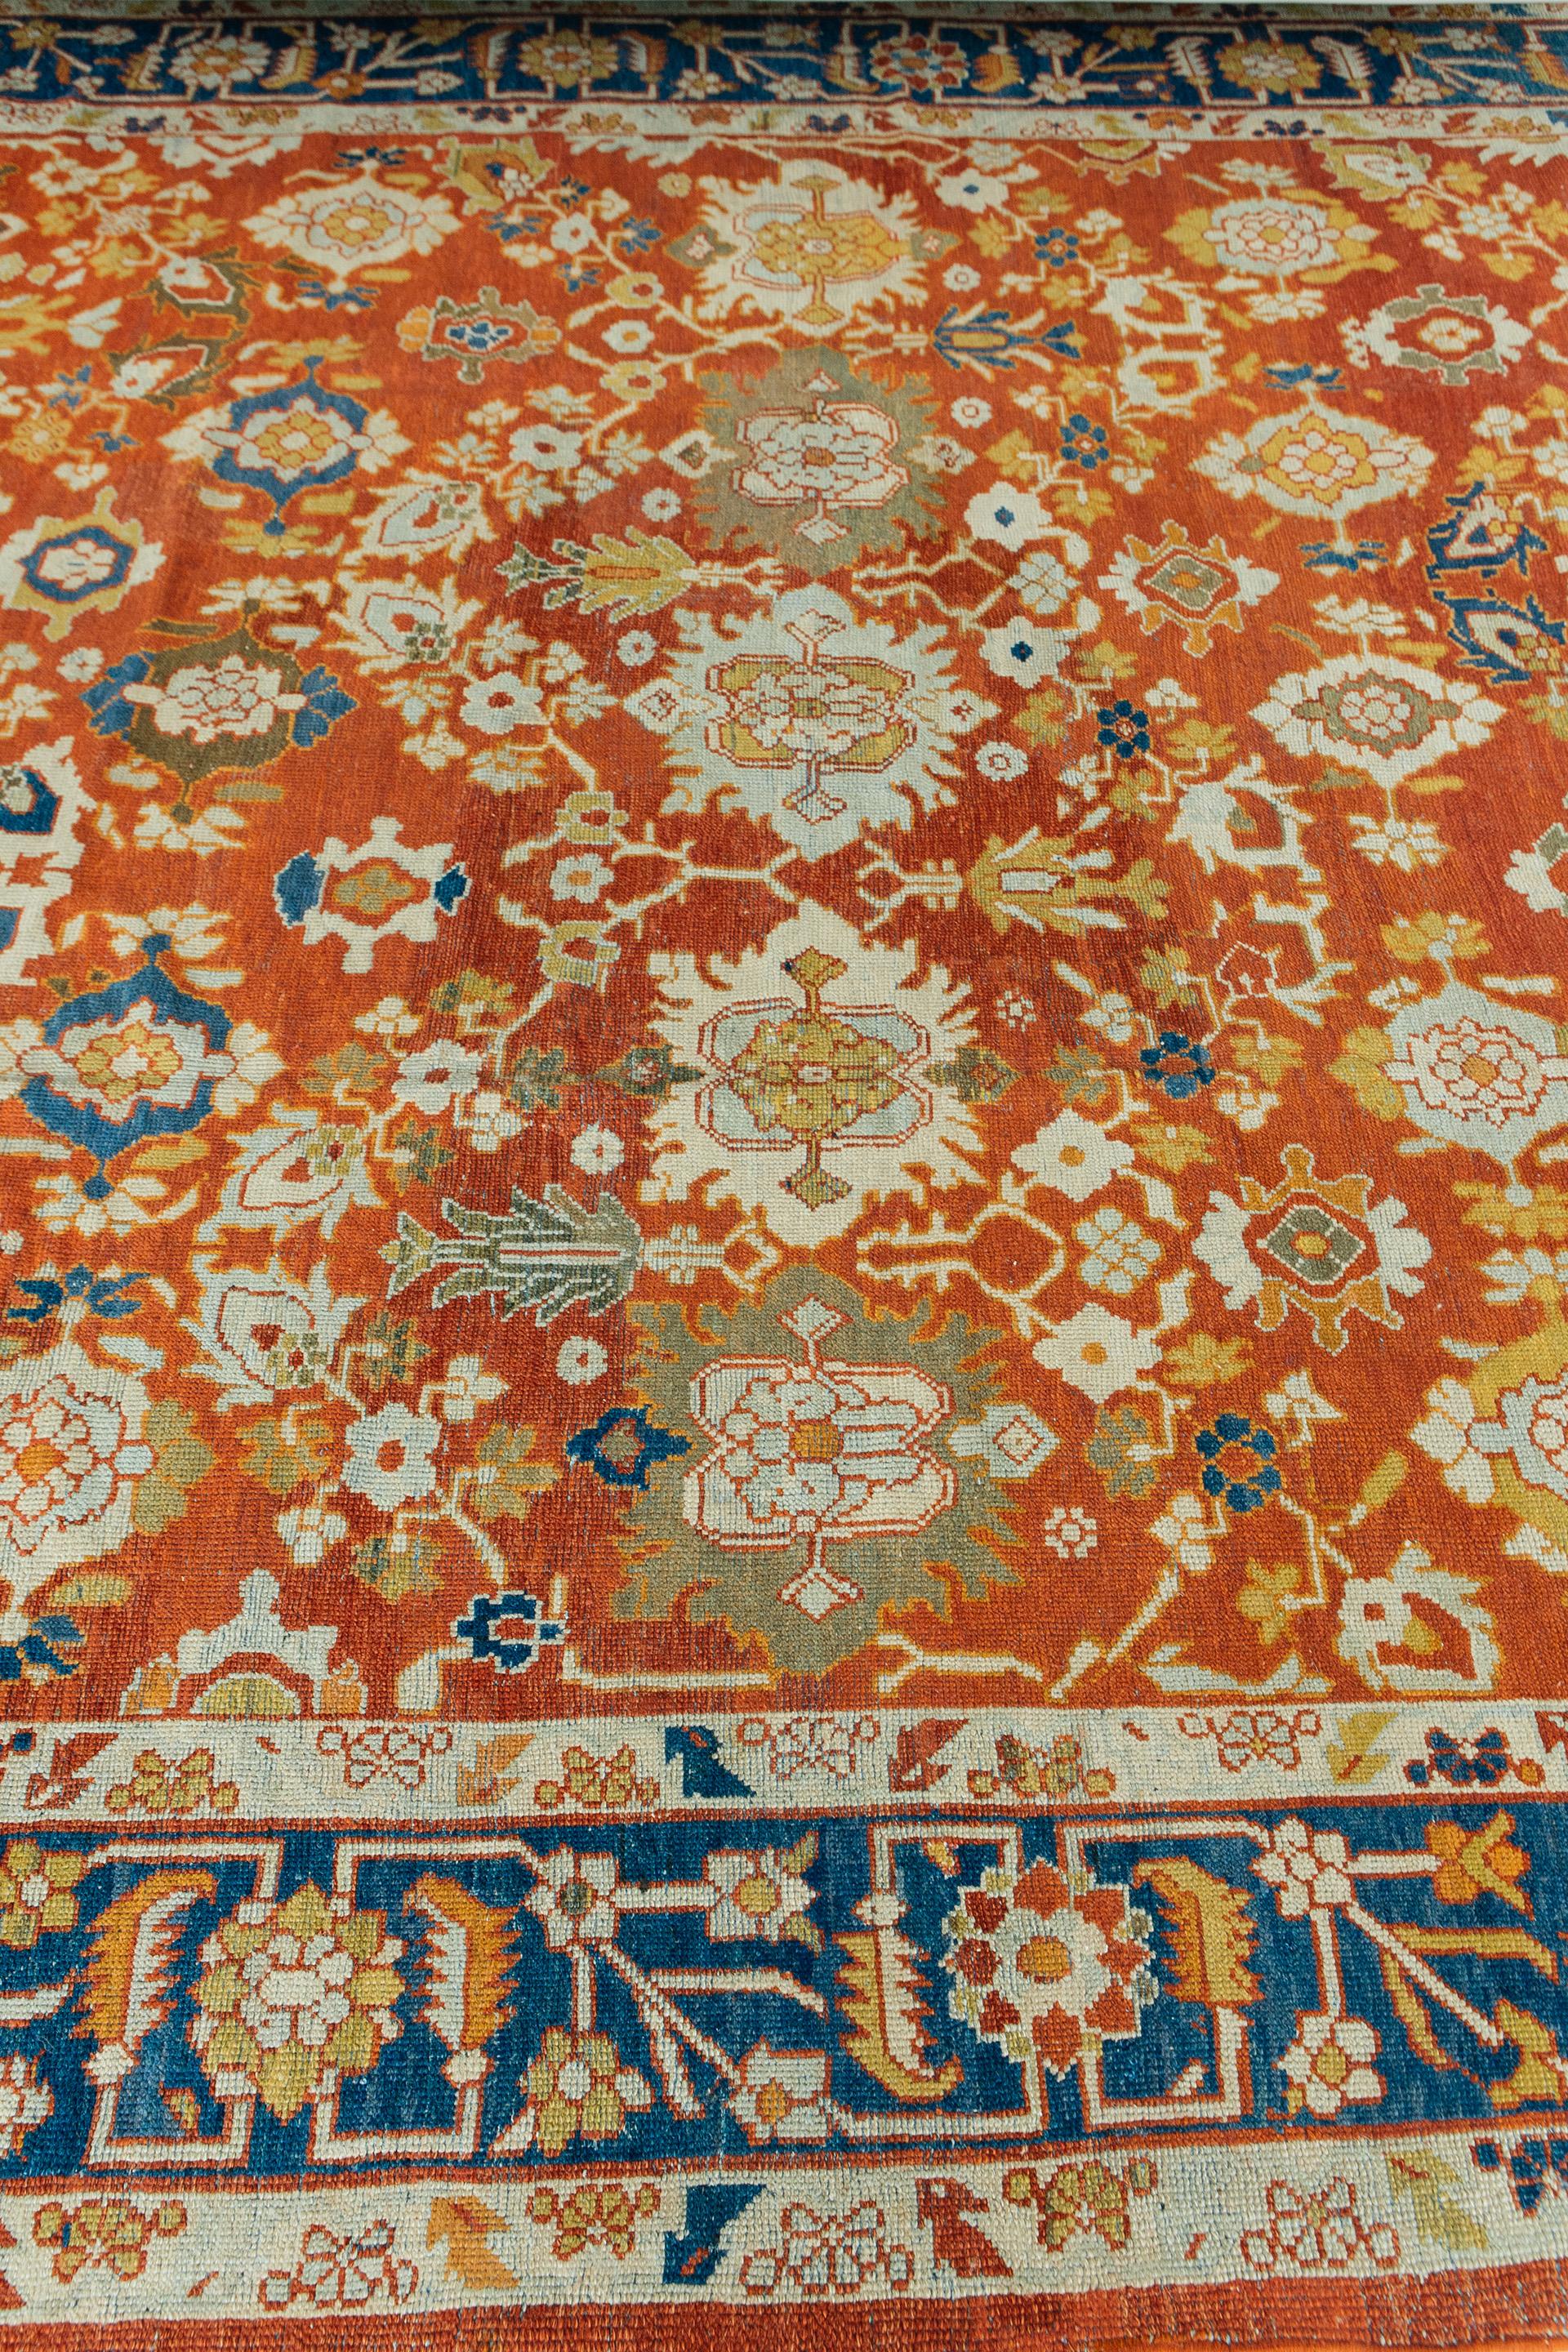 This Antique Mahal features a bold, red-brick field and blue border with gold, pale blue, ivory and olive accents. Rows of large-scale palmettes and floral motifs establish an active all-over design. This is a stately design produced for the